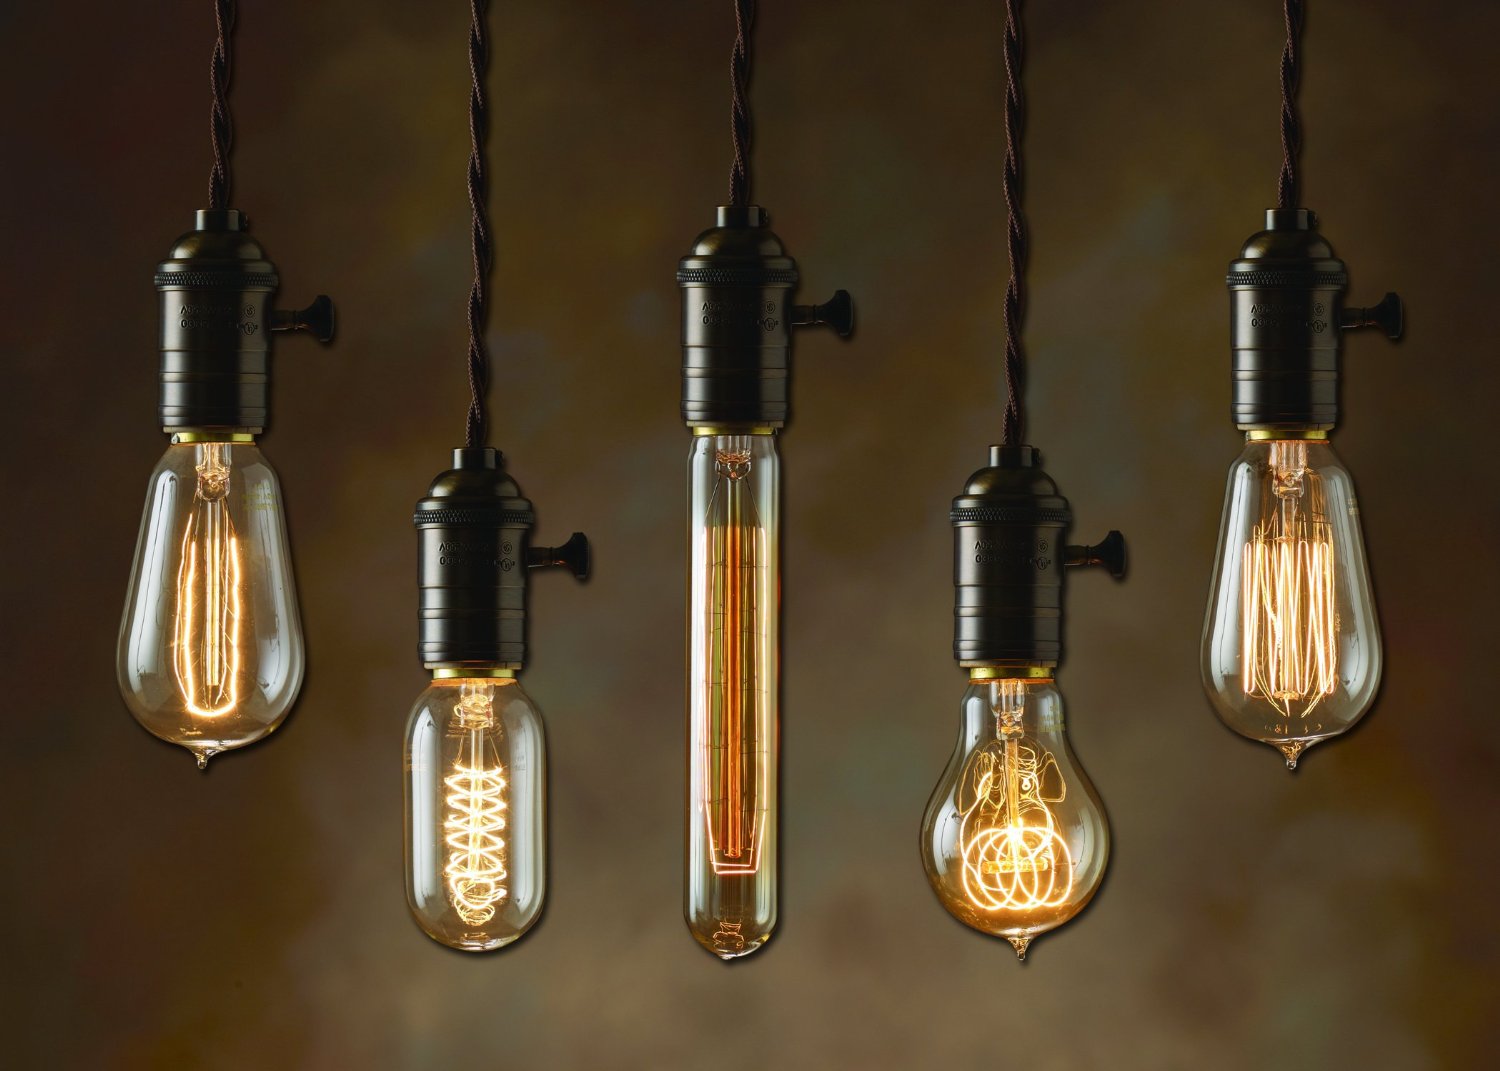 the best vintage lighting stores in the uk 2 minute read EDUNFWZ